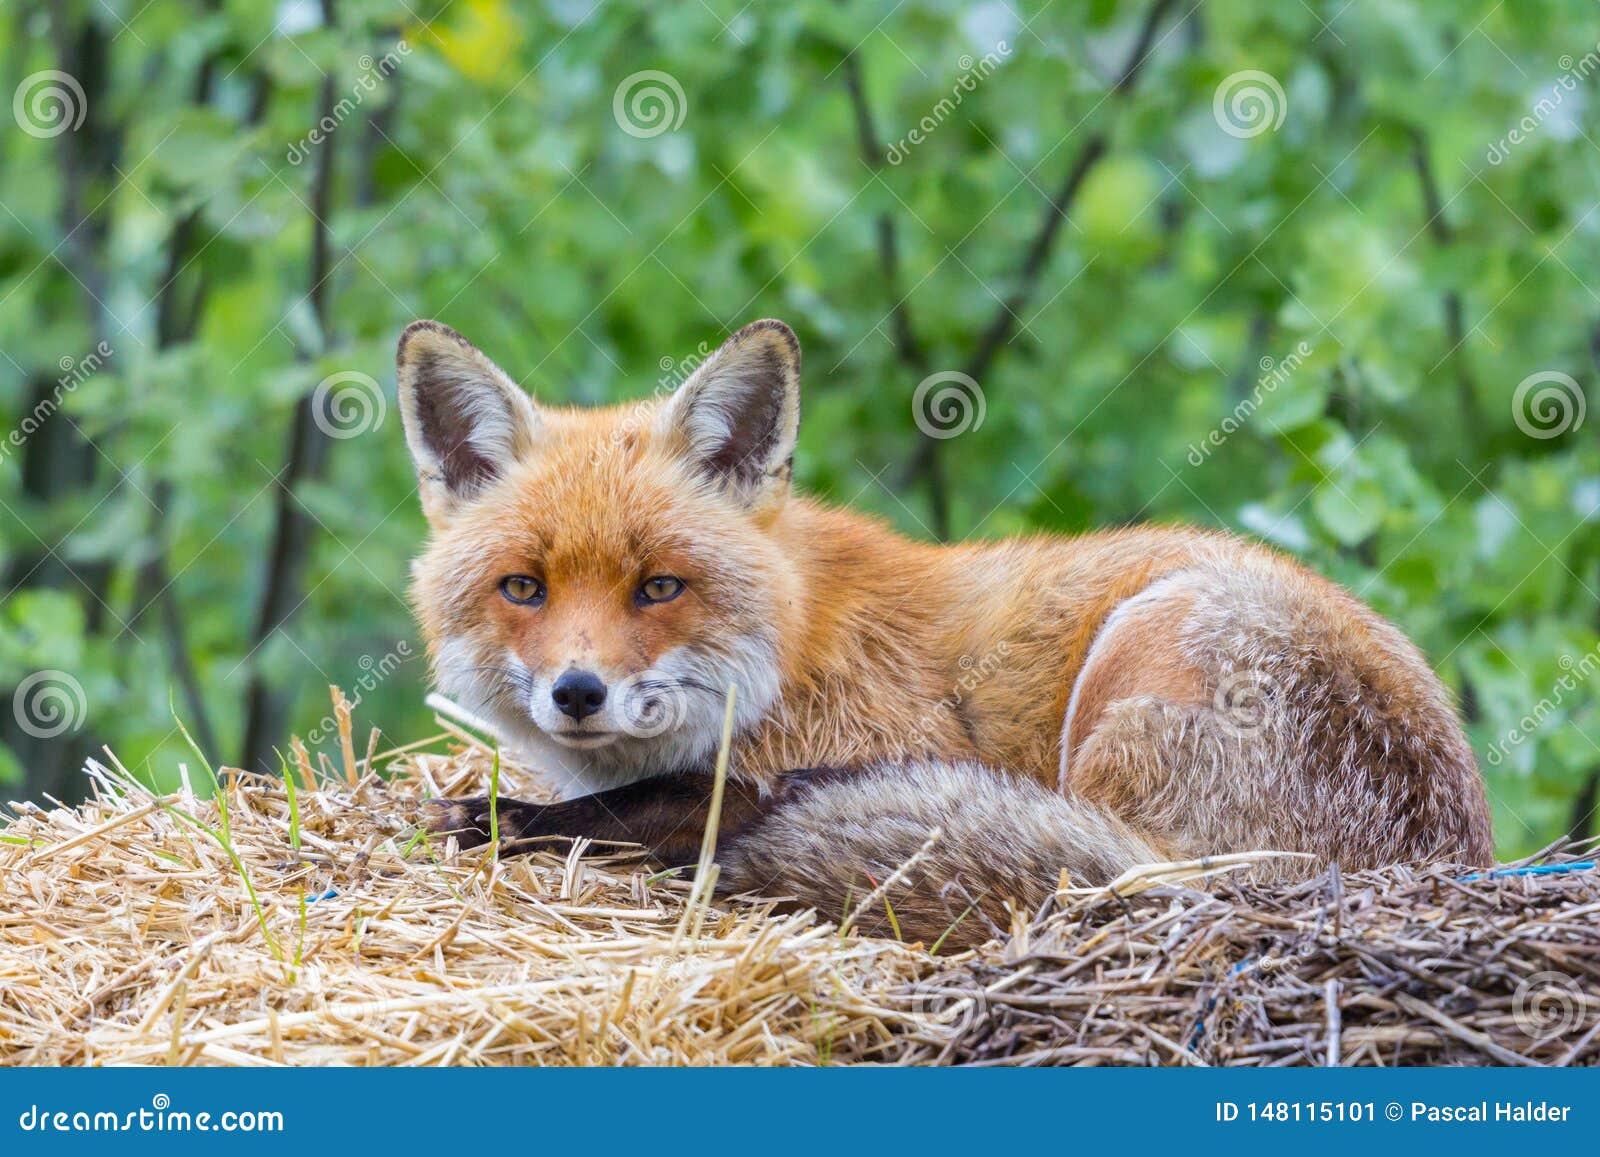 close-up red fox vulpes on straw